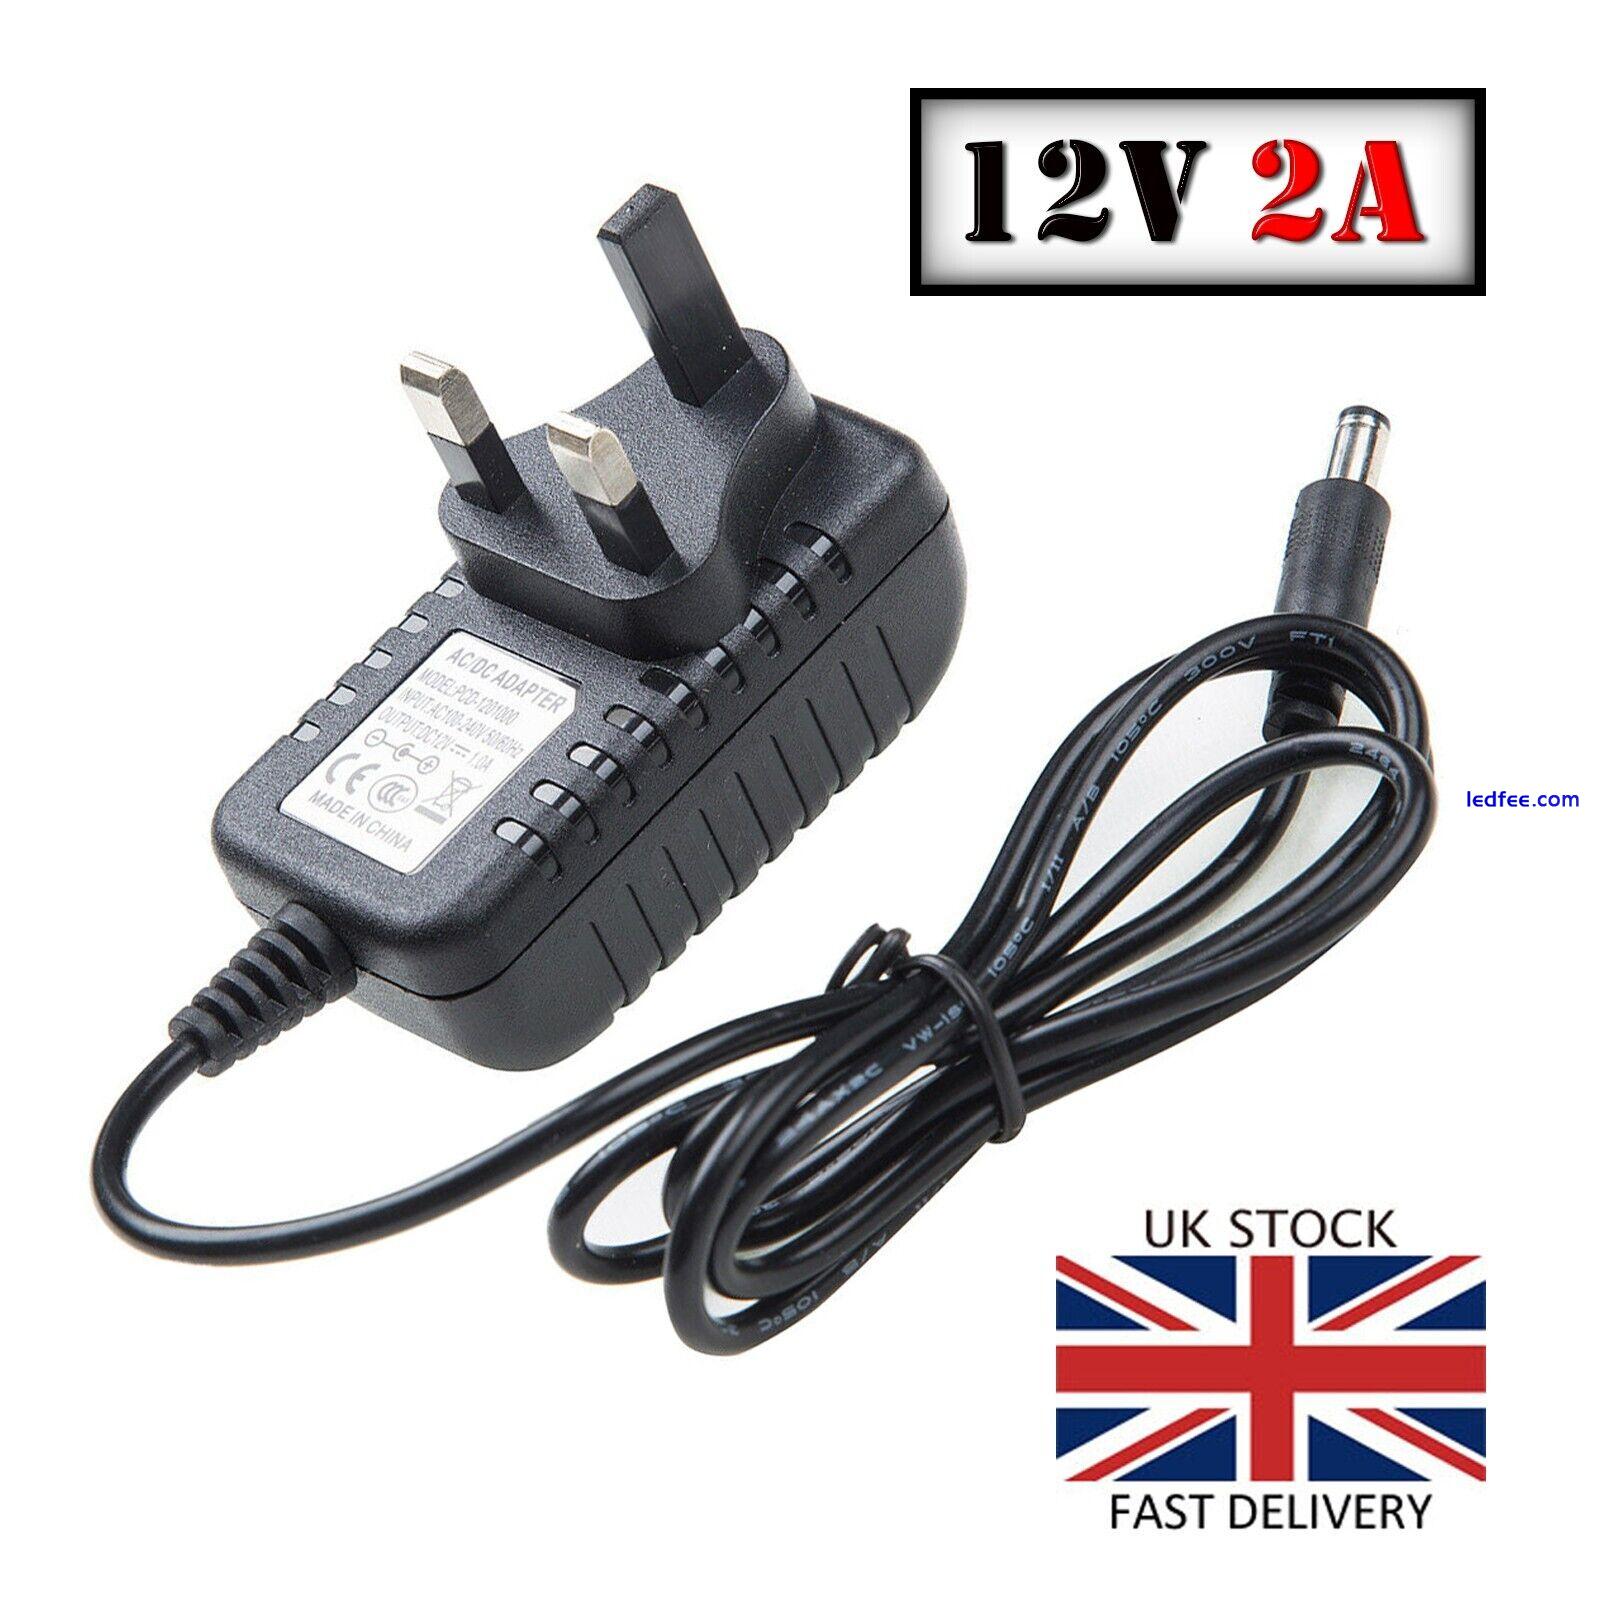 10 x 2A AC/DC UK Power Supply Adapter Safety Charger For LED Strip CCTV Camera 3 